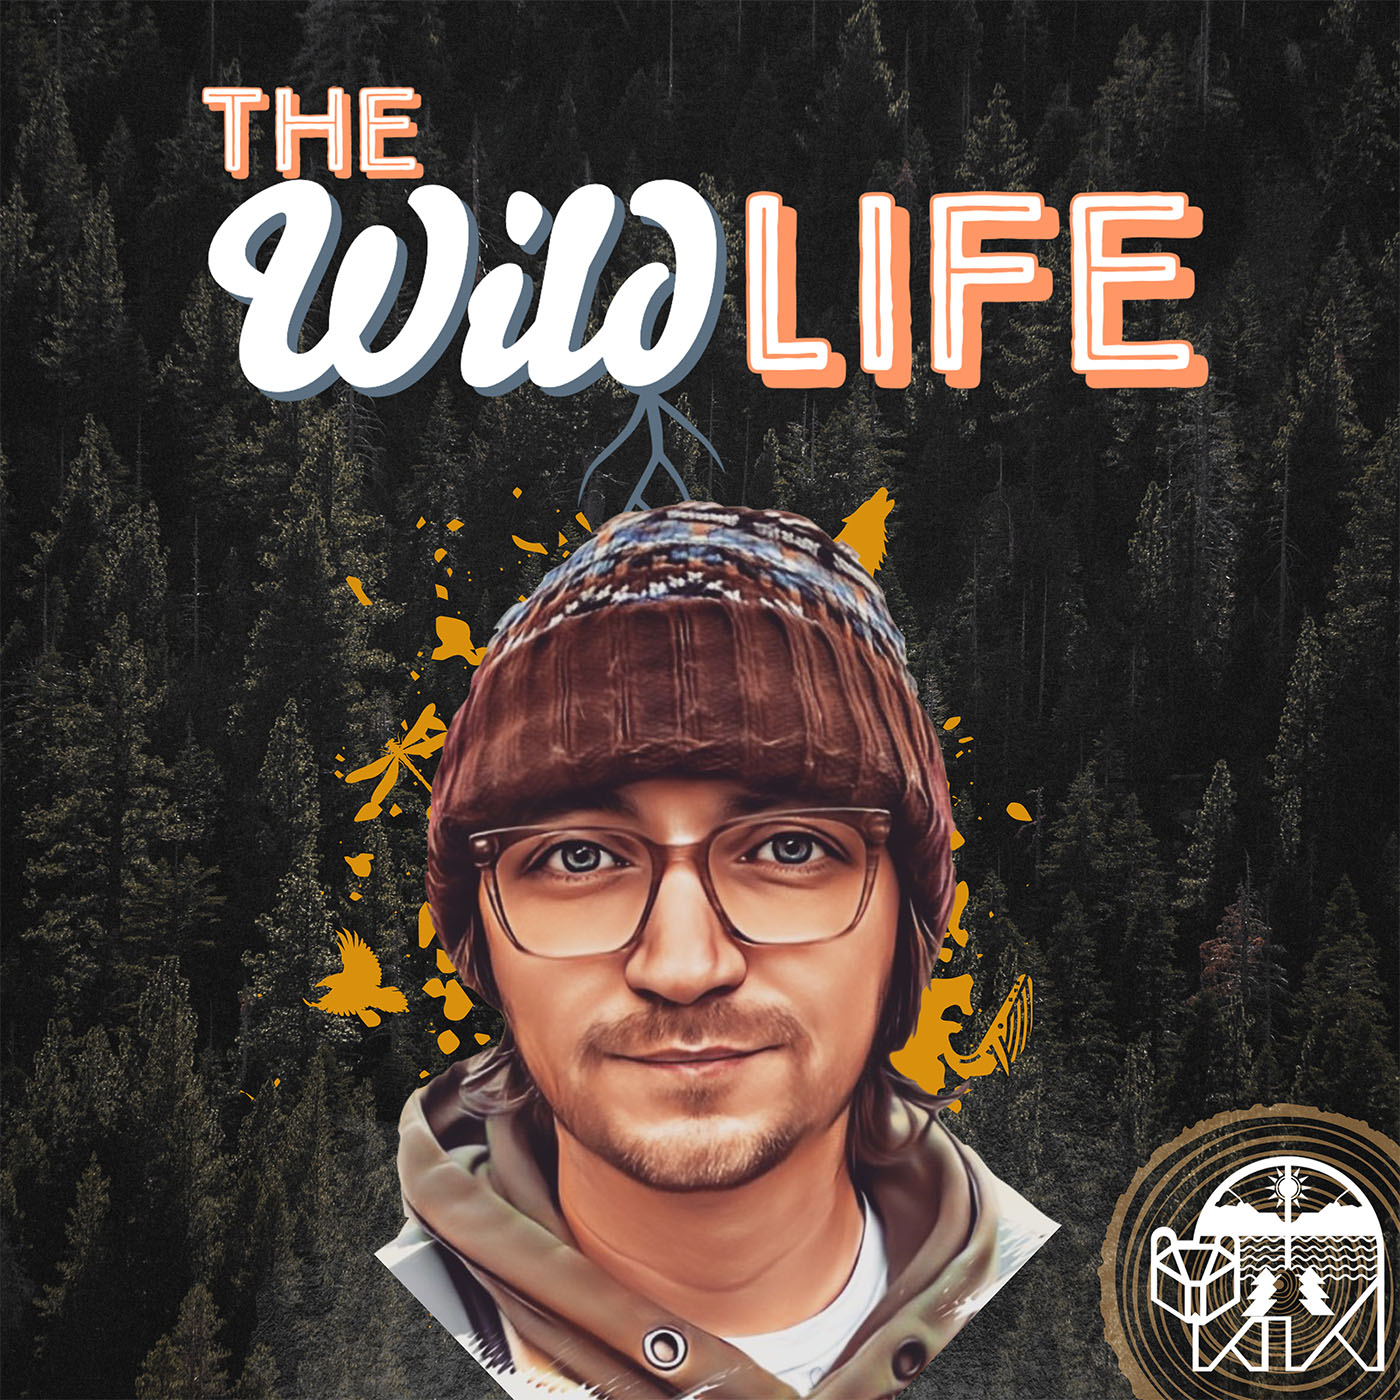 Artwork for podcast The Wild Life